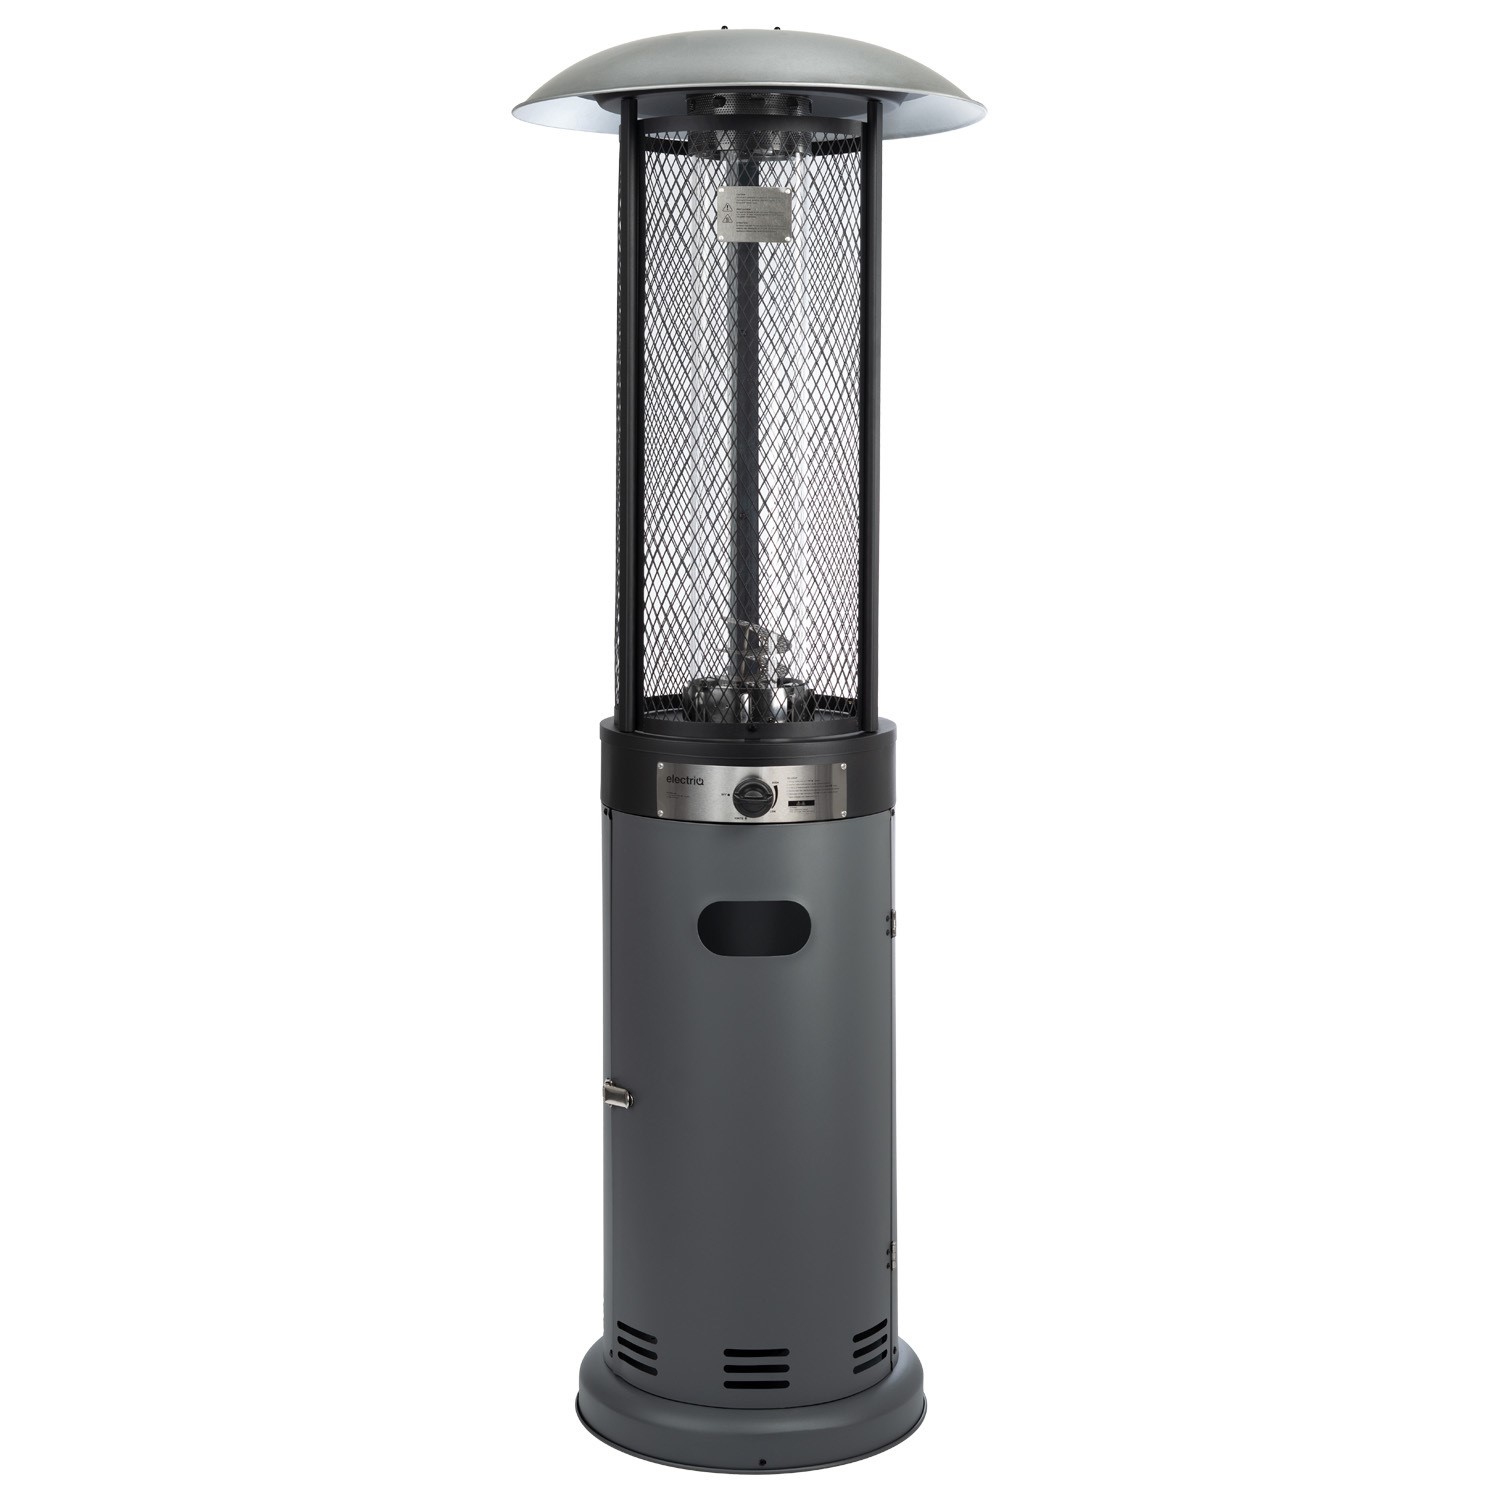 Outdoor Freestanding Gas Patio Heater in Grey with Free Cover